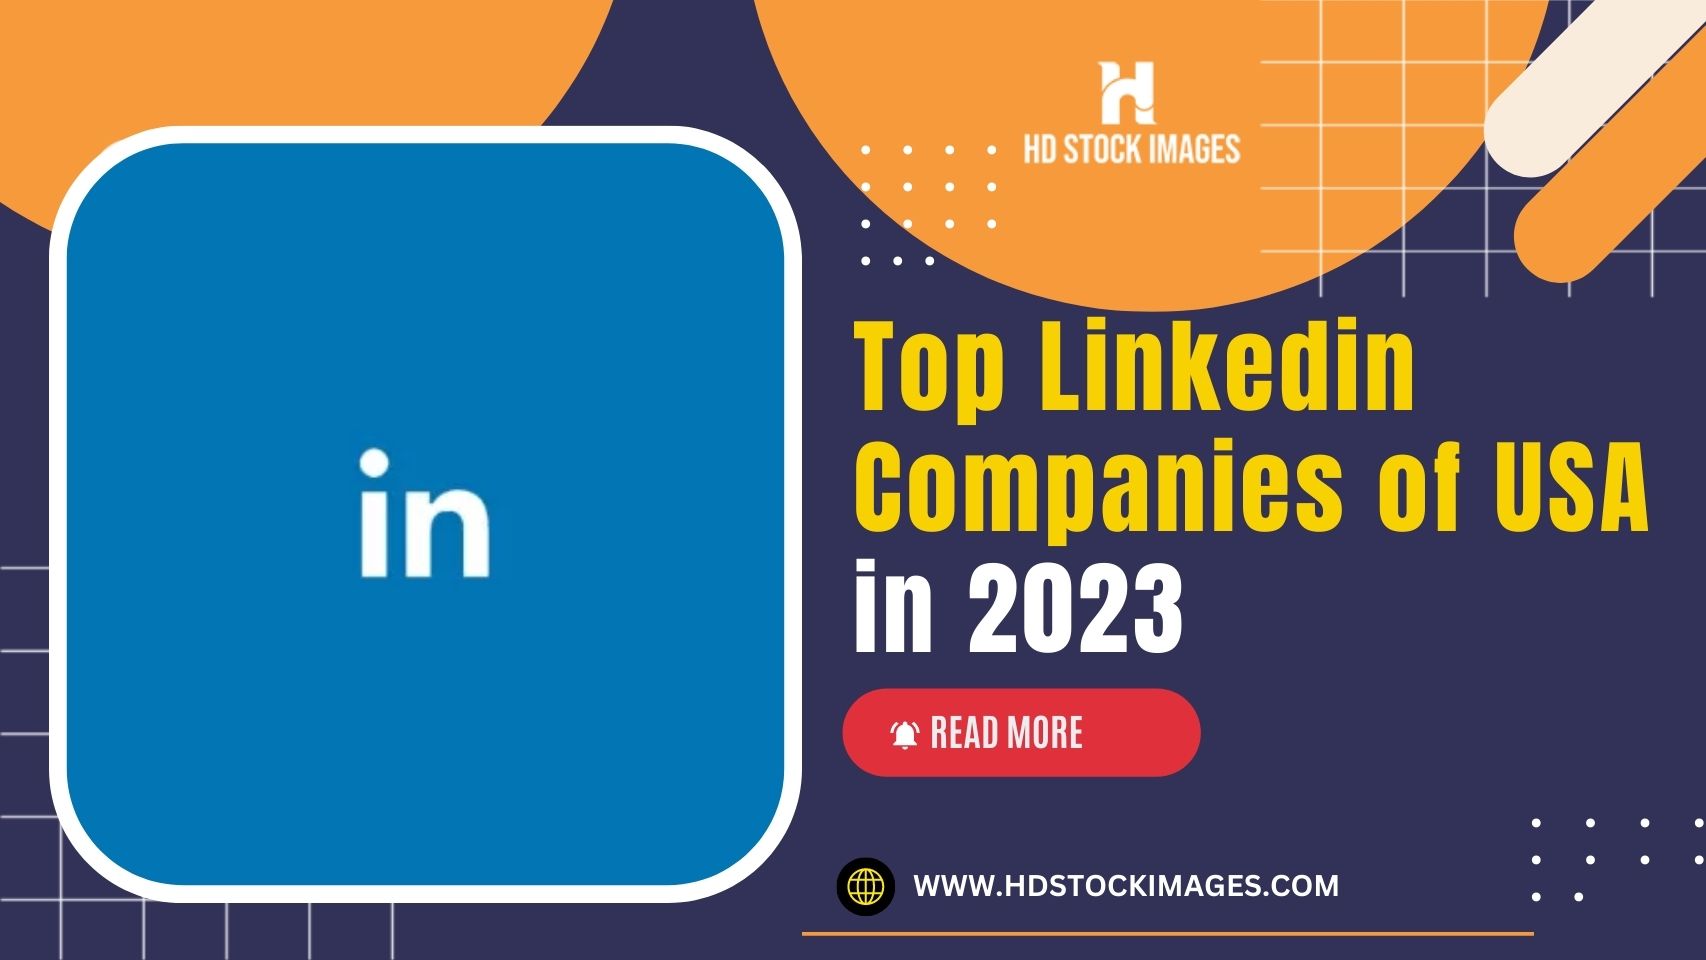 an image of List of Top Linkedin Companies of USA in 2023